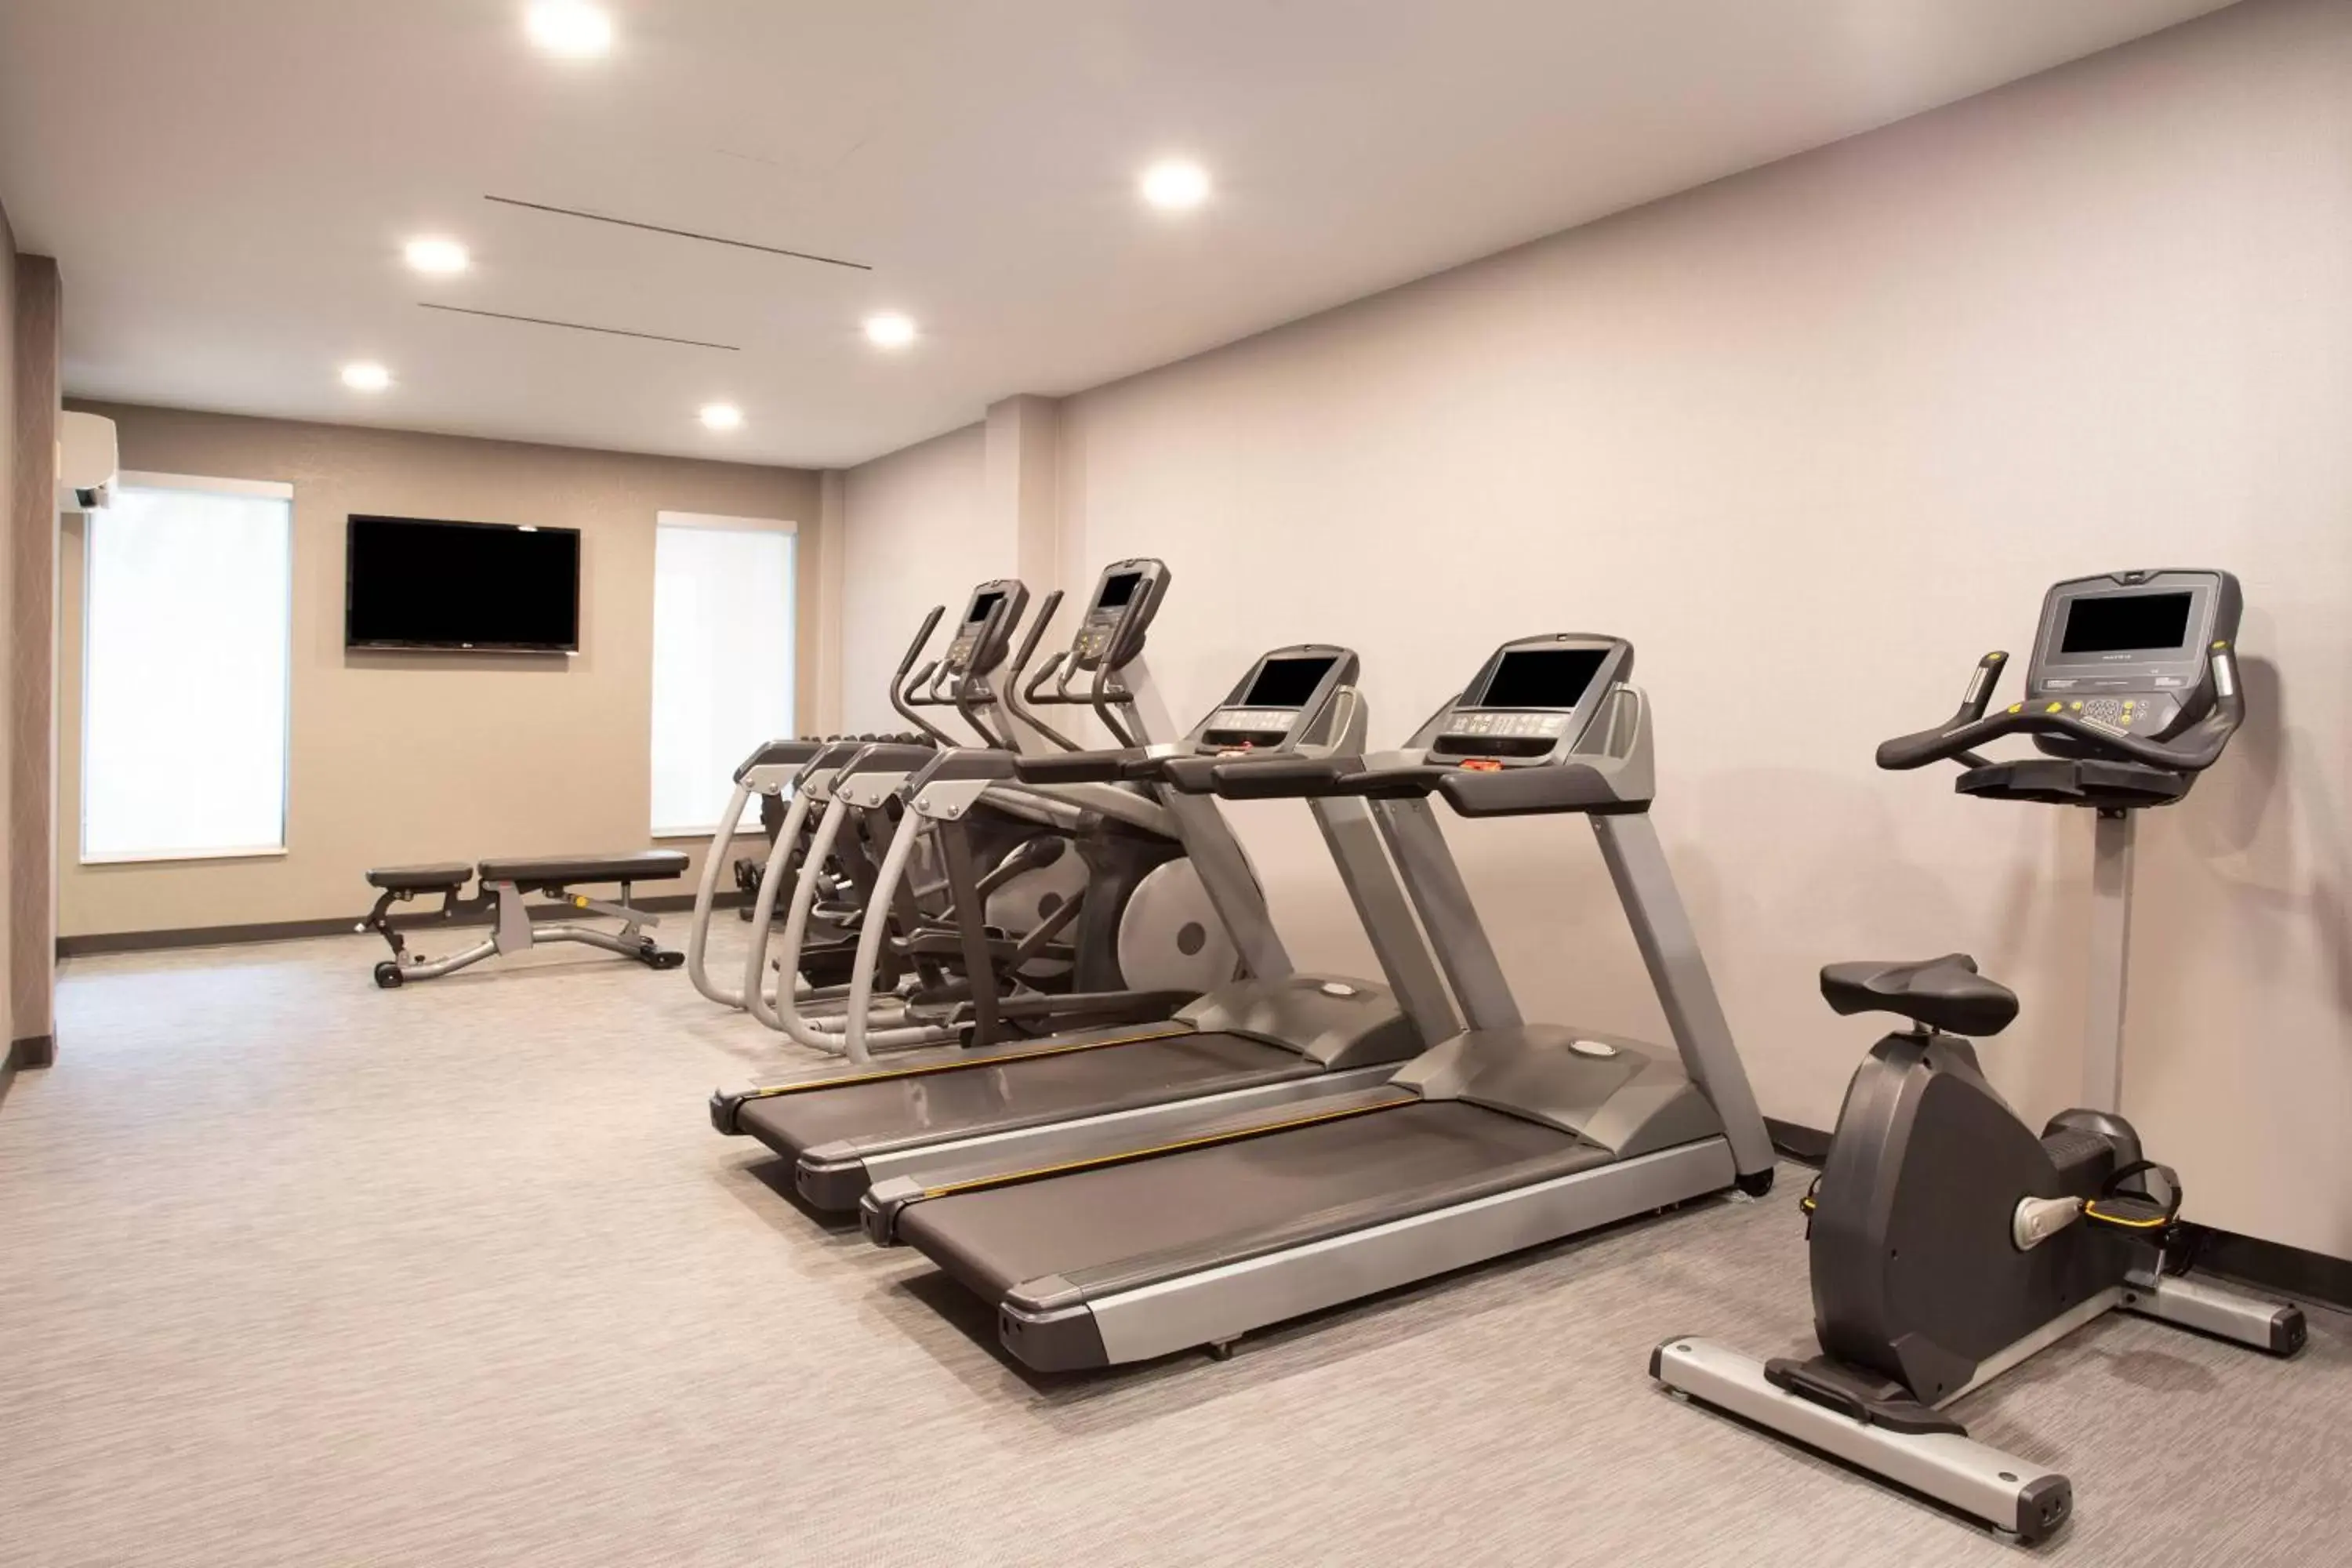 Fitness centre/facilities, Fitness Center/Facilities in Courtyard Orlando Altamonte Springs Maitland